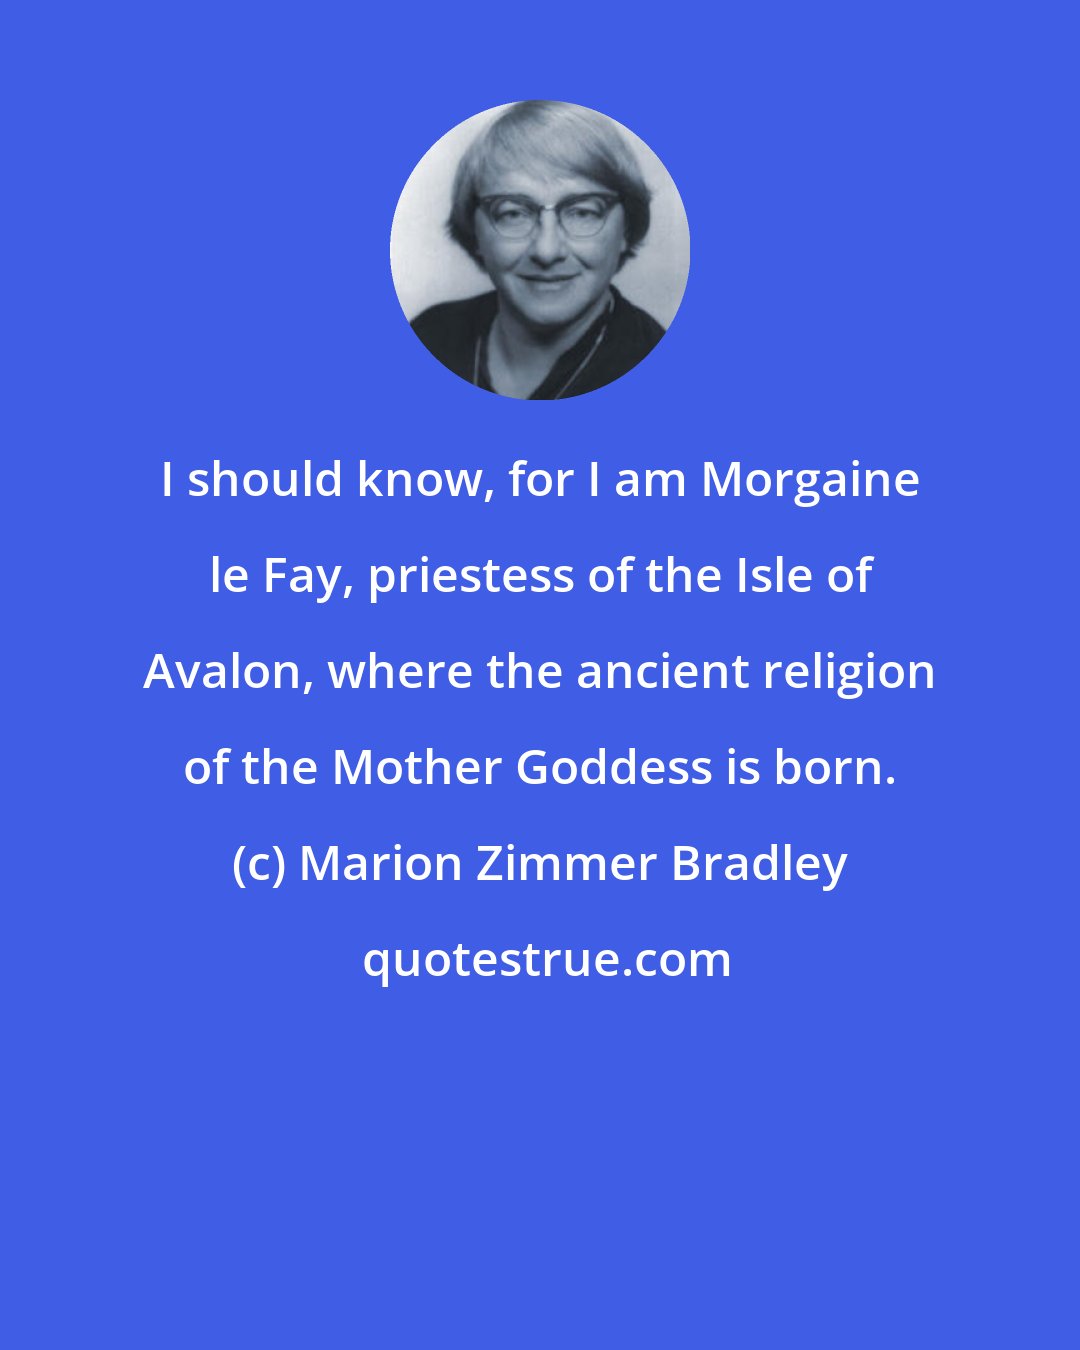 Marion Zimmer Bradley: I should know, for I am Morgaine le Fay, priestess of the Isle of Avalon, where the ancient religion of the Mother Goddess is born.